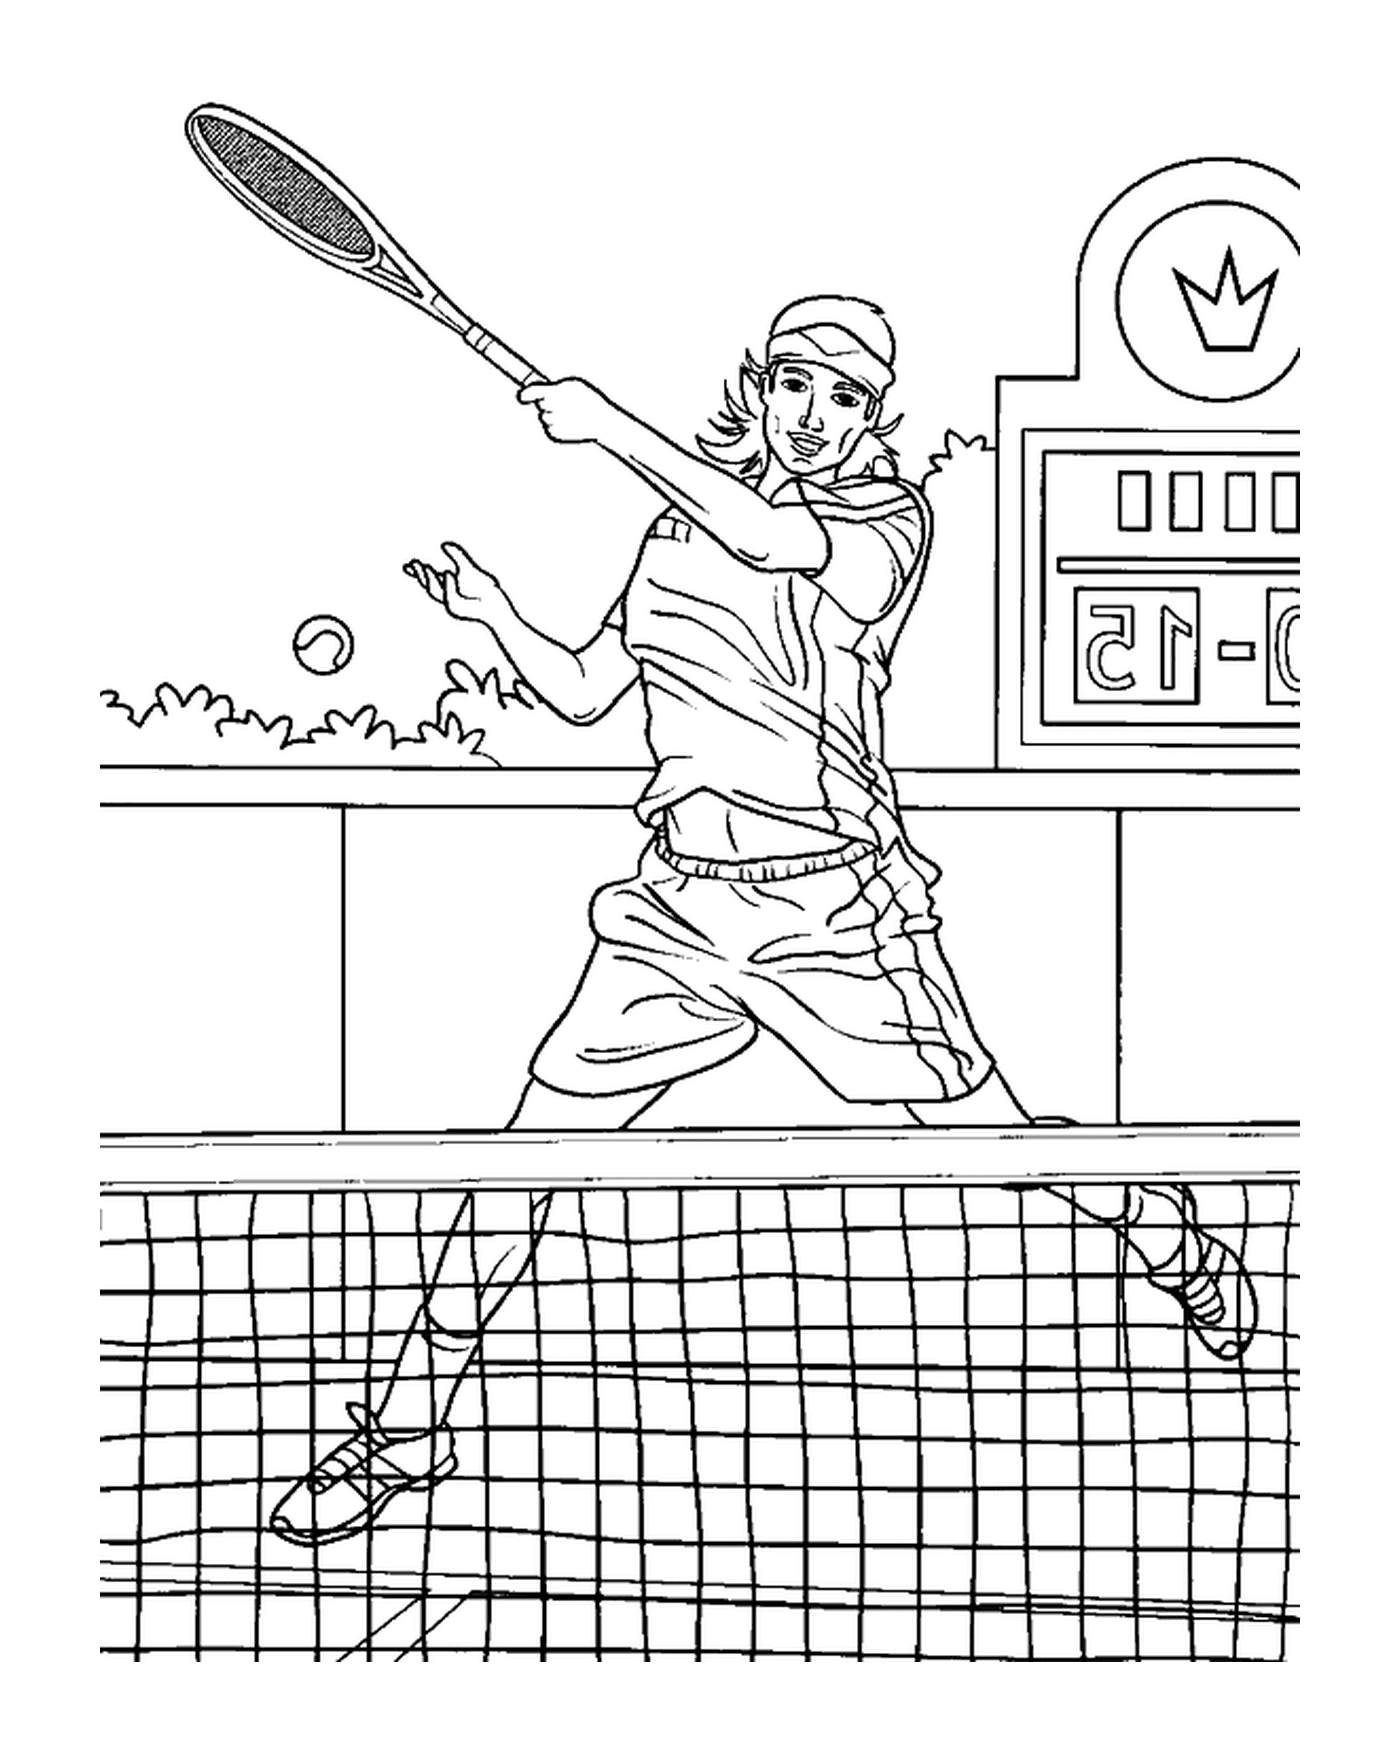  An animated tennis game 